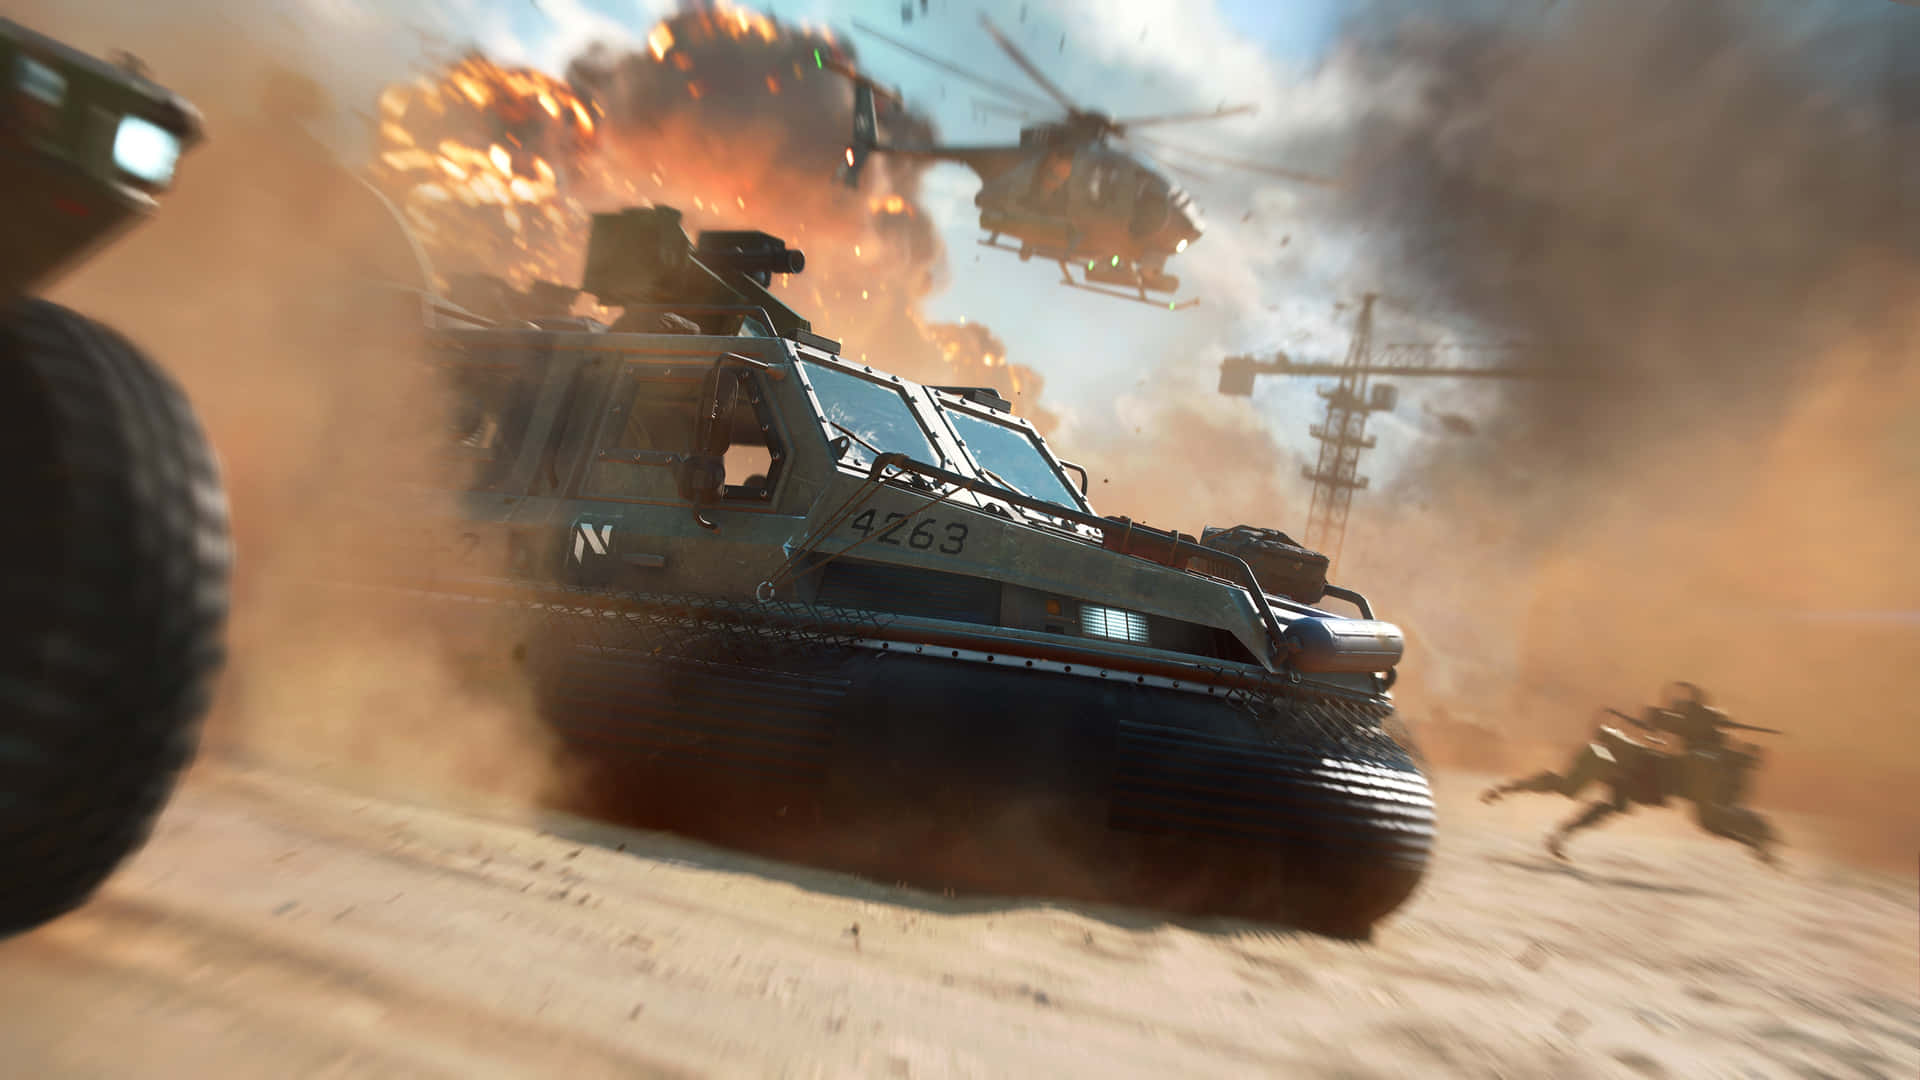 Captivating Battlefield Vehicles in Action Wallpaper